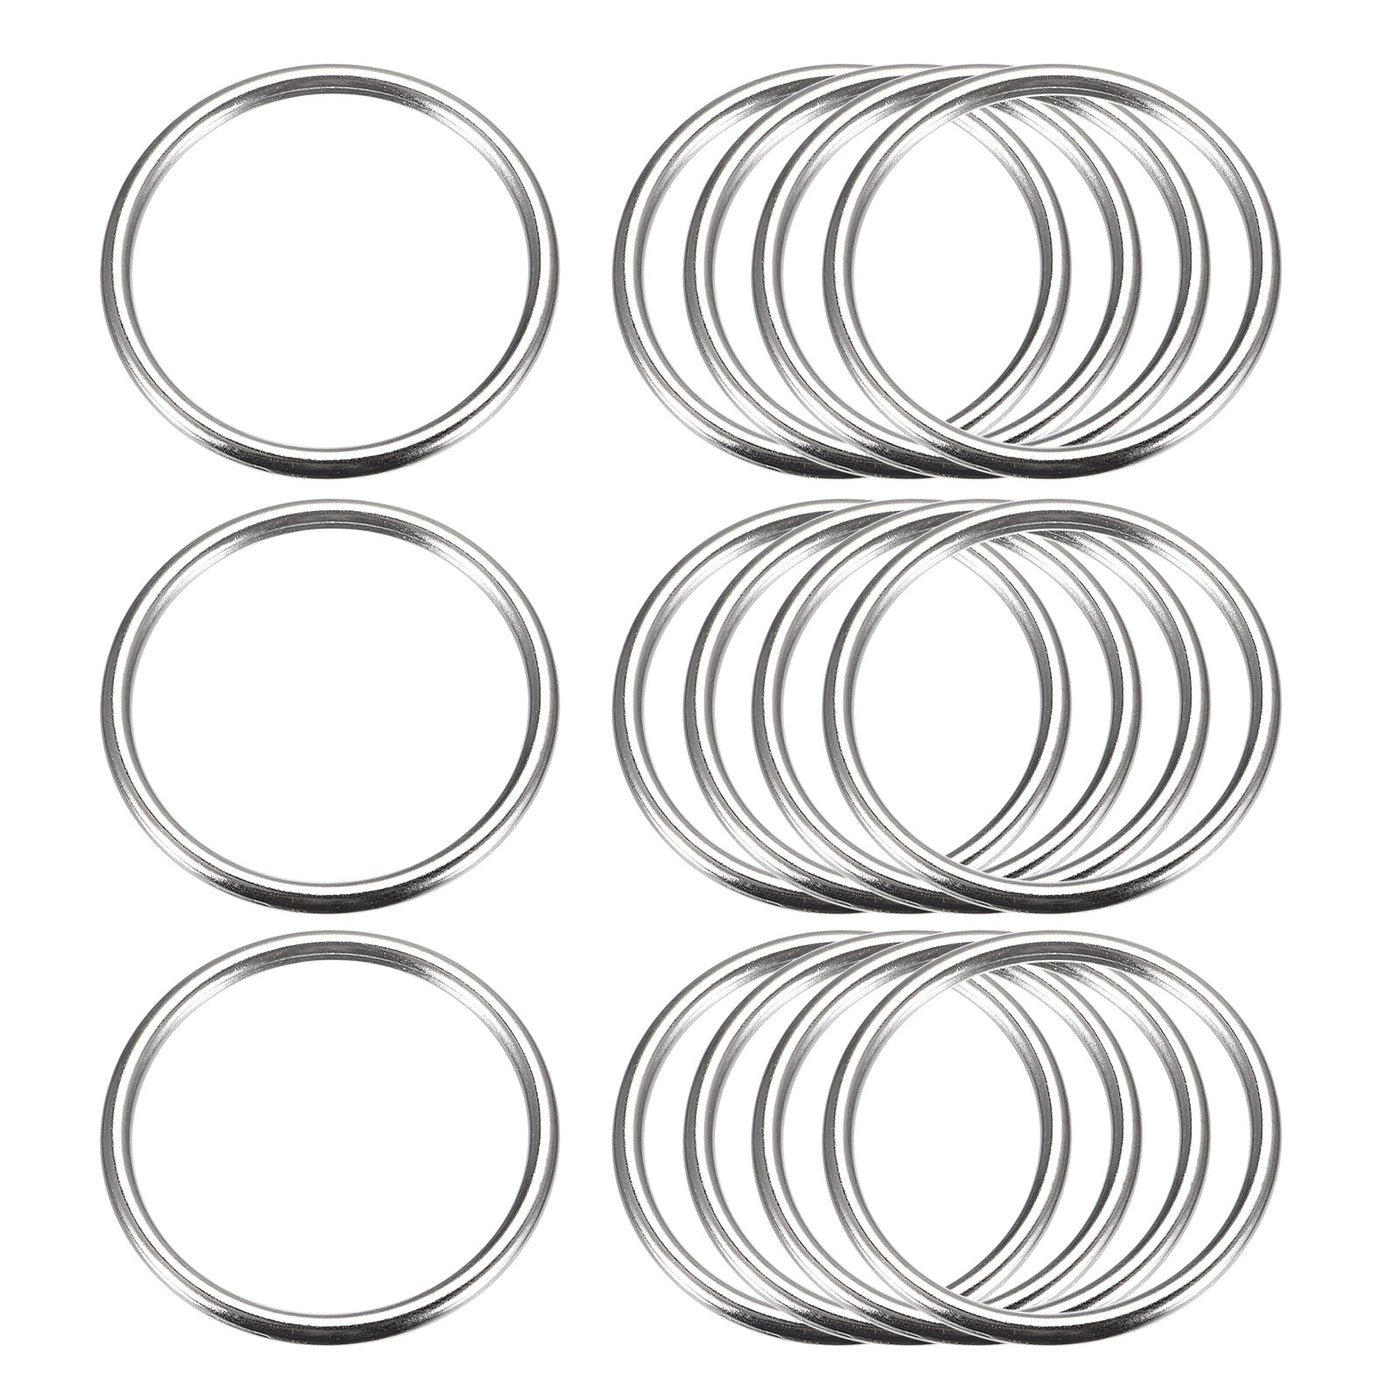 uxcell Uxcell Metal O Rings, 15pcs 35mm(1.38") ID 3mm Thick Welded O-Ringe, Silver Tone